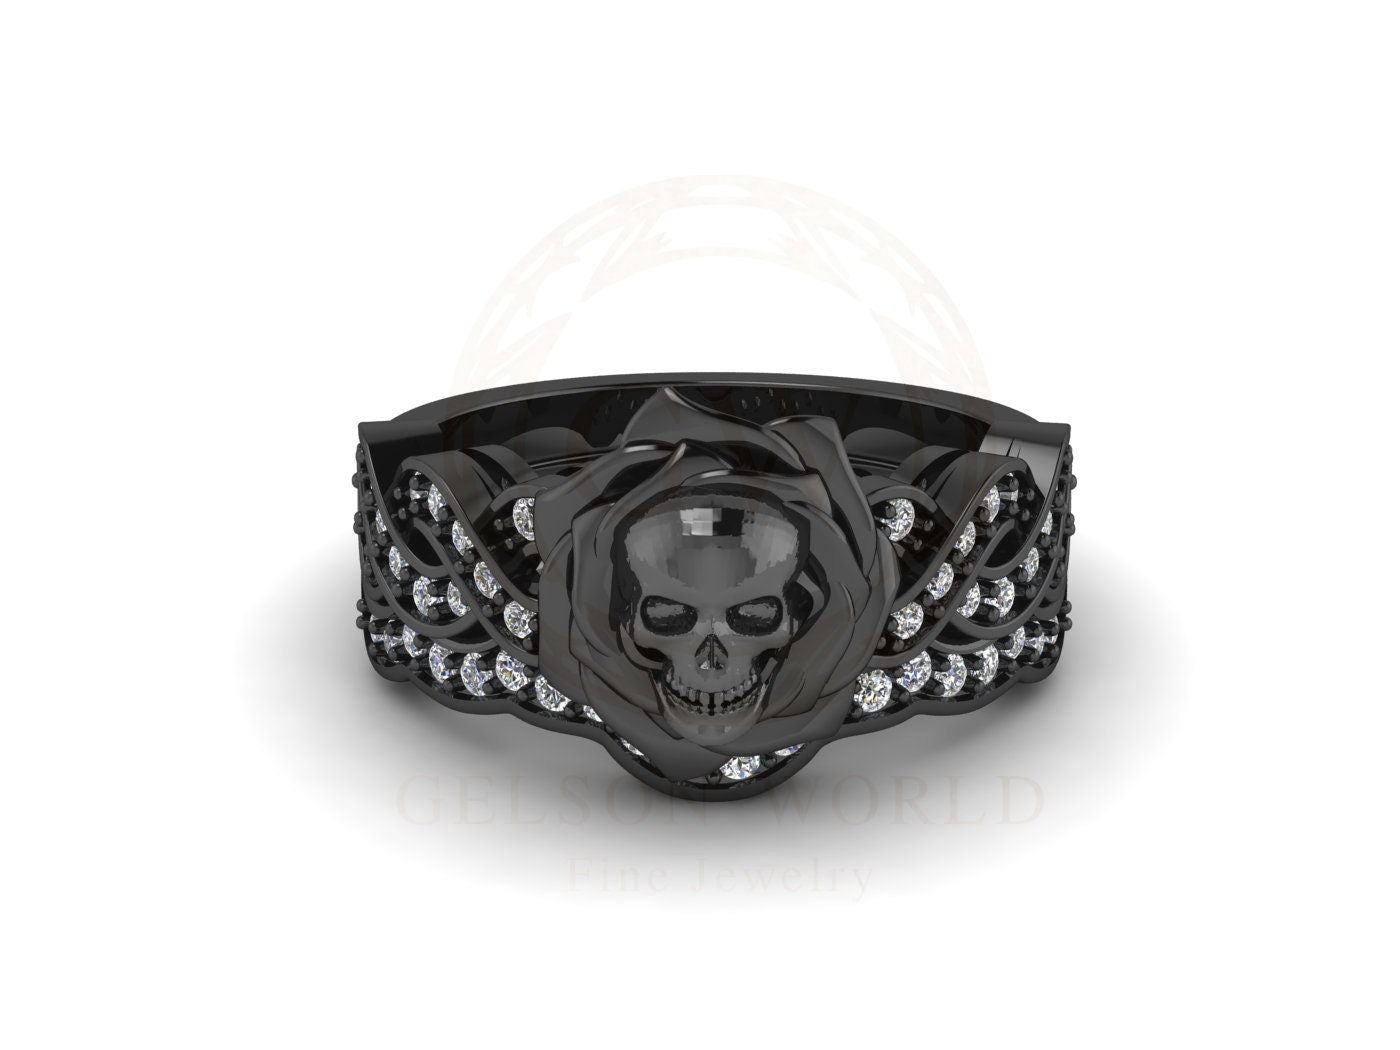 Skull Bridal Gothic Wedding Ring Sets, Rose Floral Engagement Ring, Criss Cross Nature Inspired Design, White Round CZ, Black Rhodium Plated